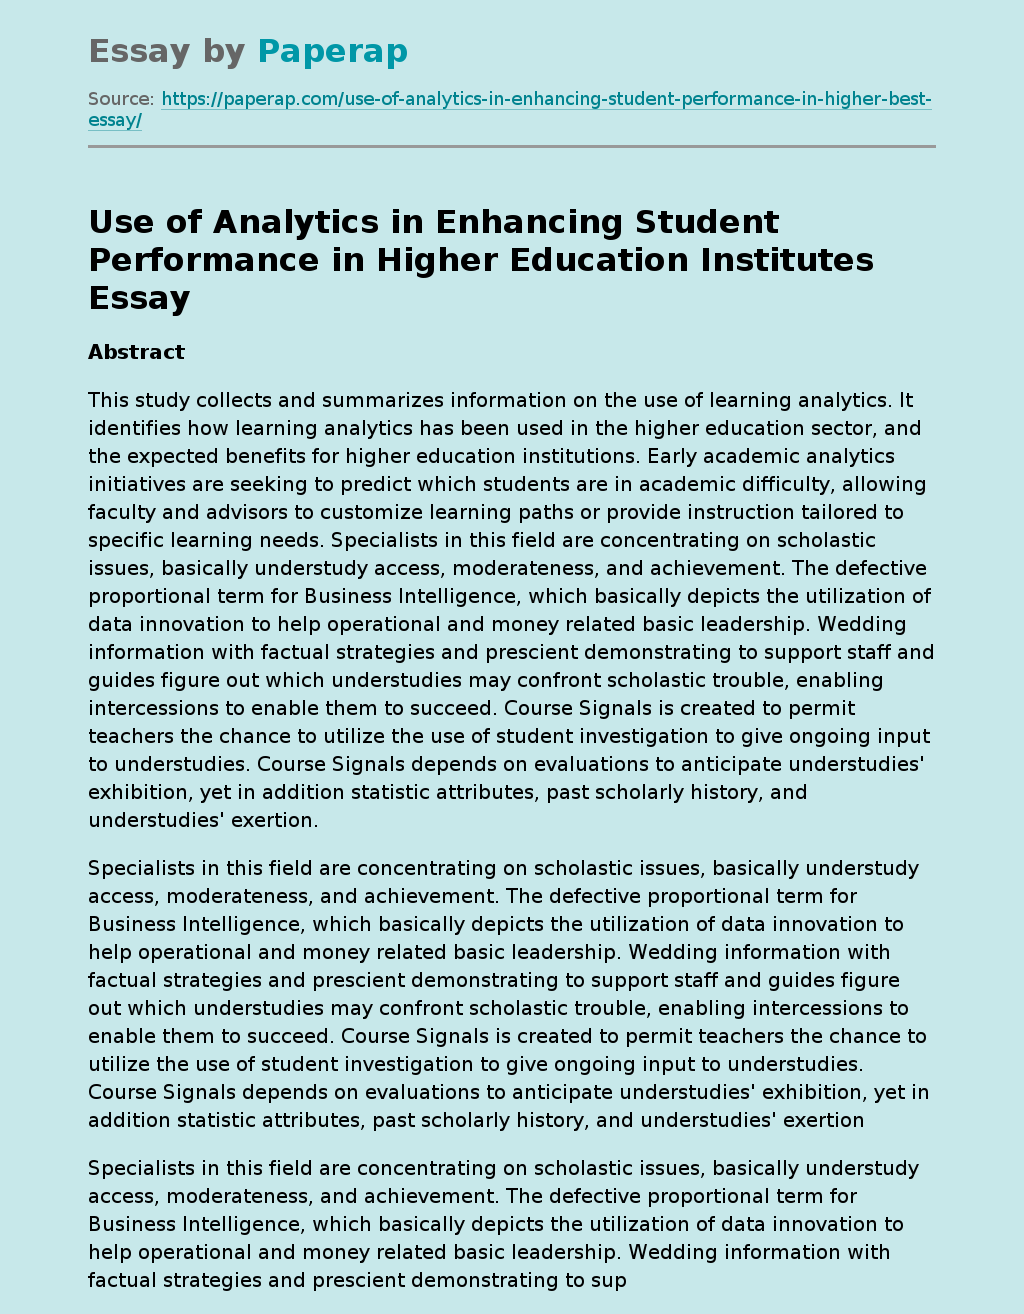 Use of Analytics in Enhancing Student Performance in Higher Education Institutes